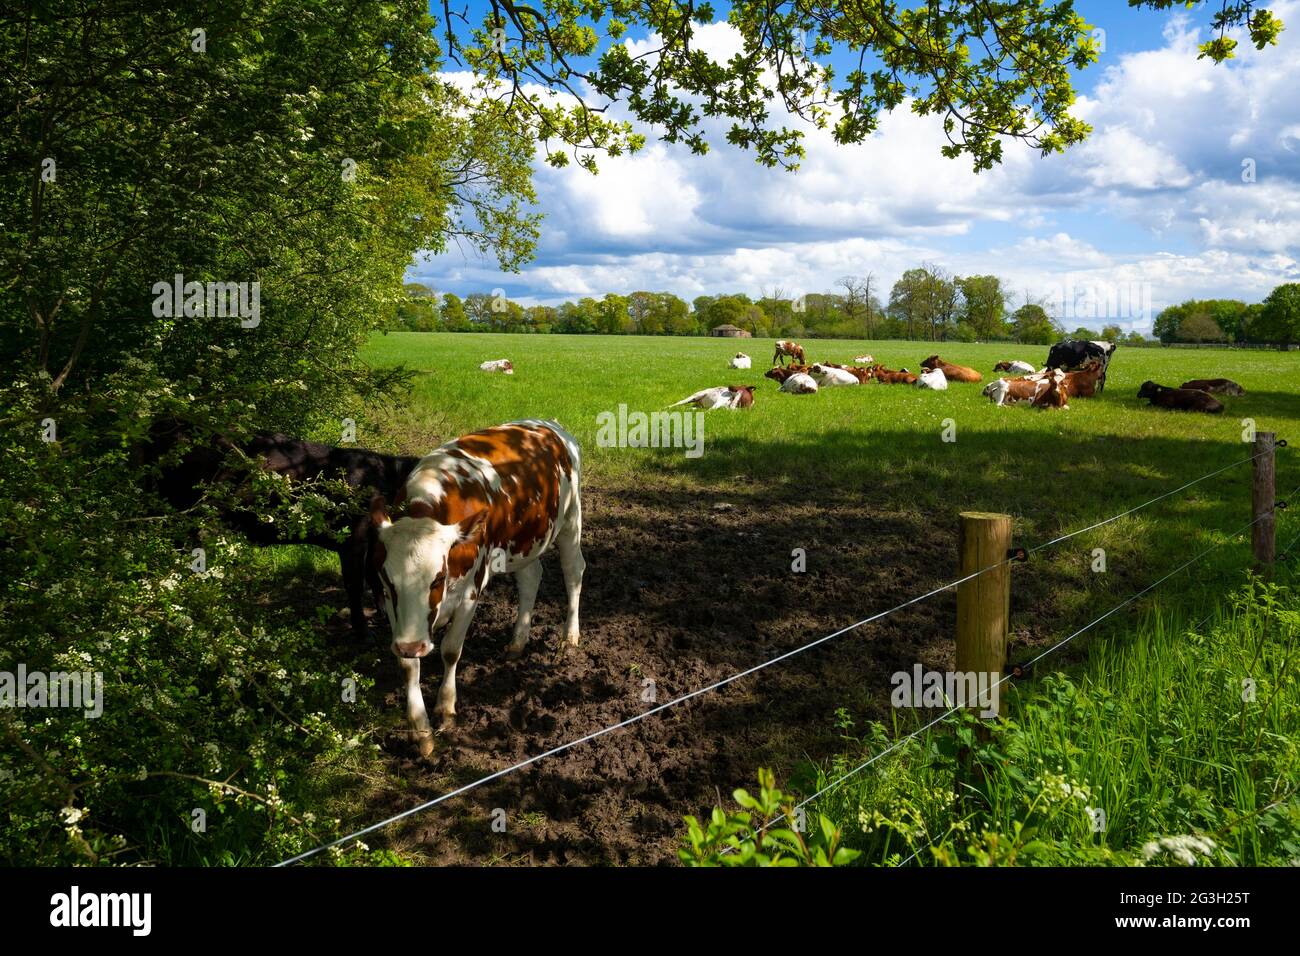 Herd of red and white friesian holstein cattle cows grazing on grassland meadow in a farmers field North Yorkshire England UK United Kingdom Britain Stock Photo